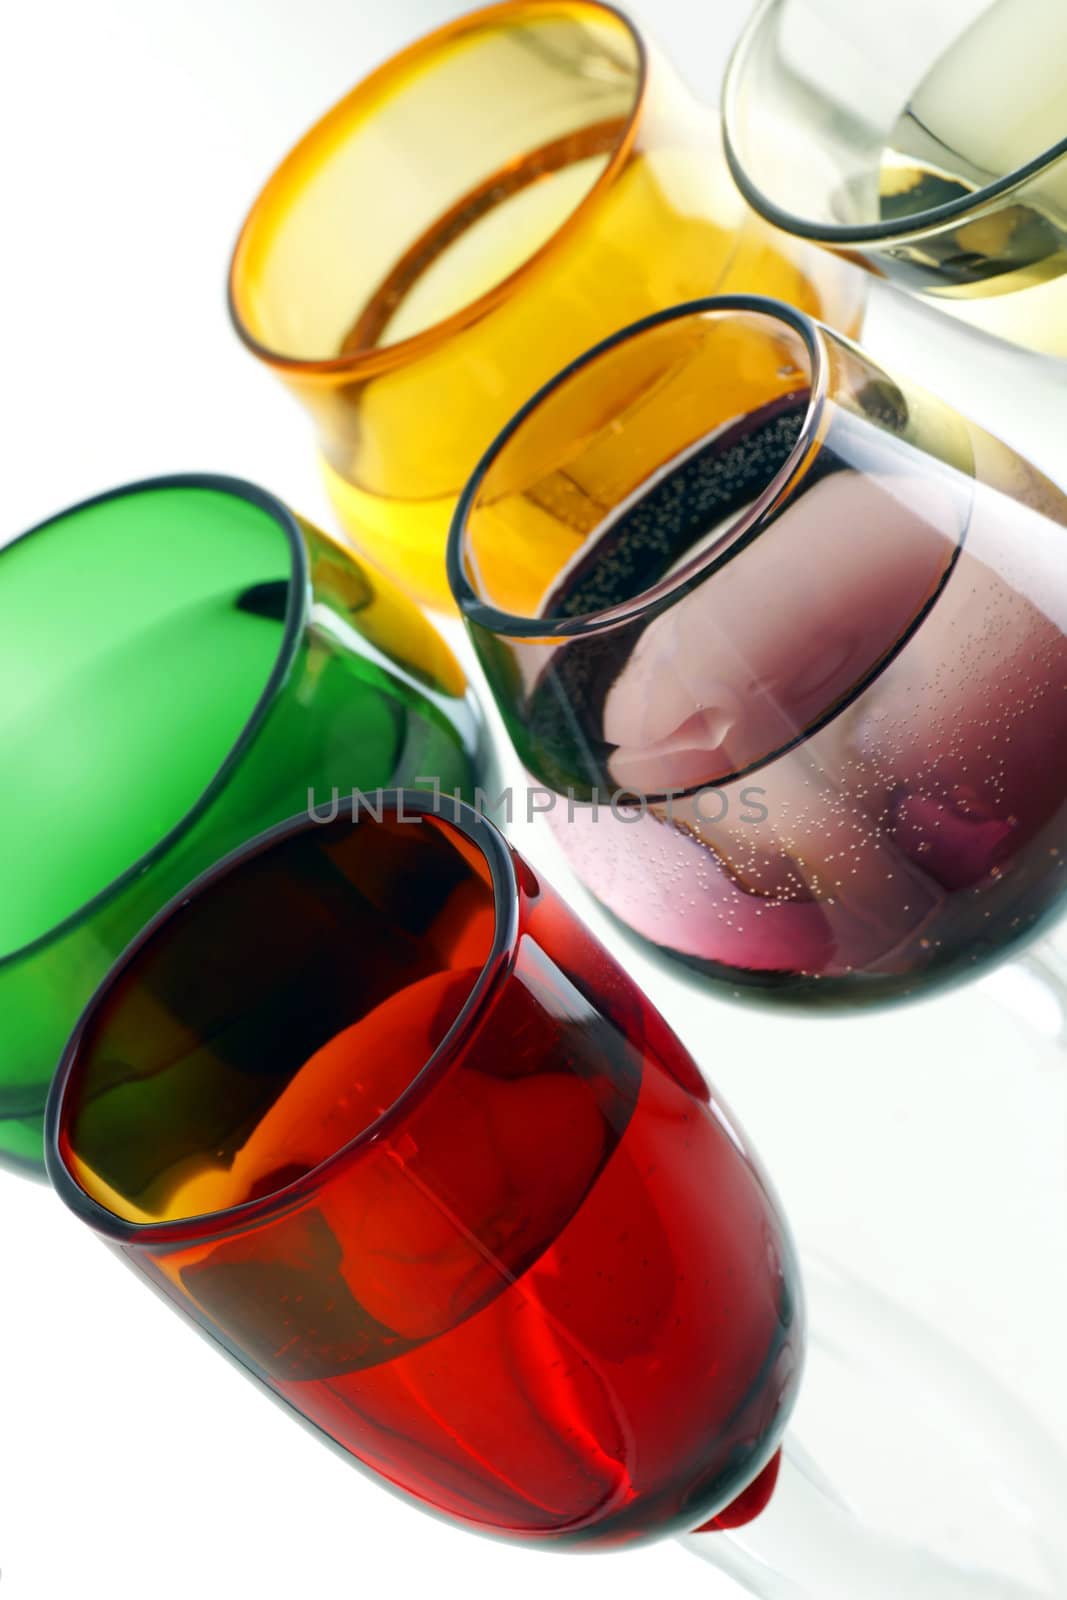 Angle shot of a collection of fun and stylish colorful hand made glasses.